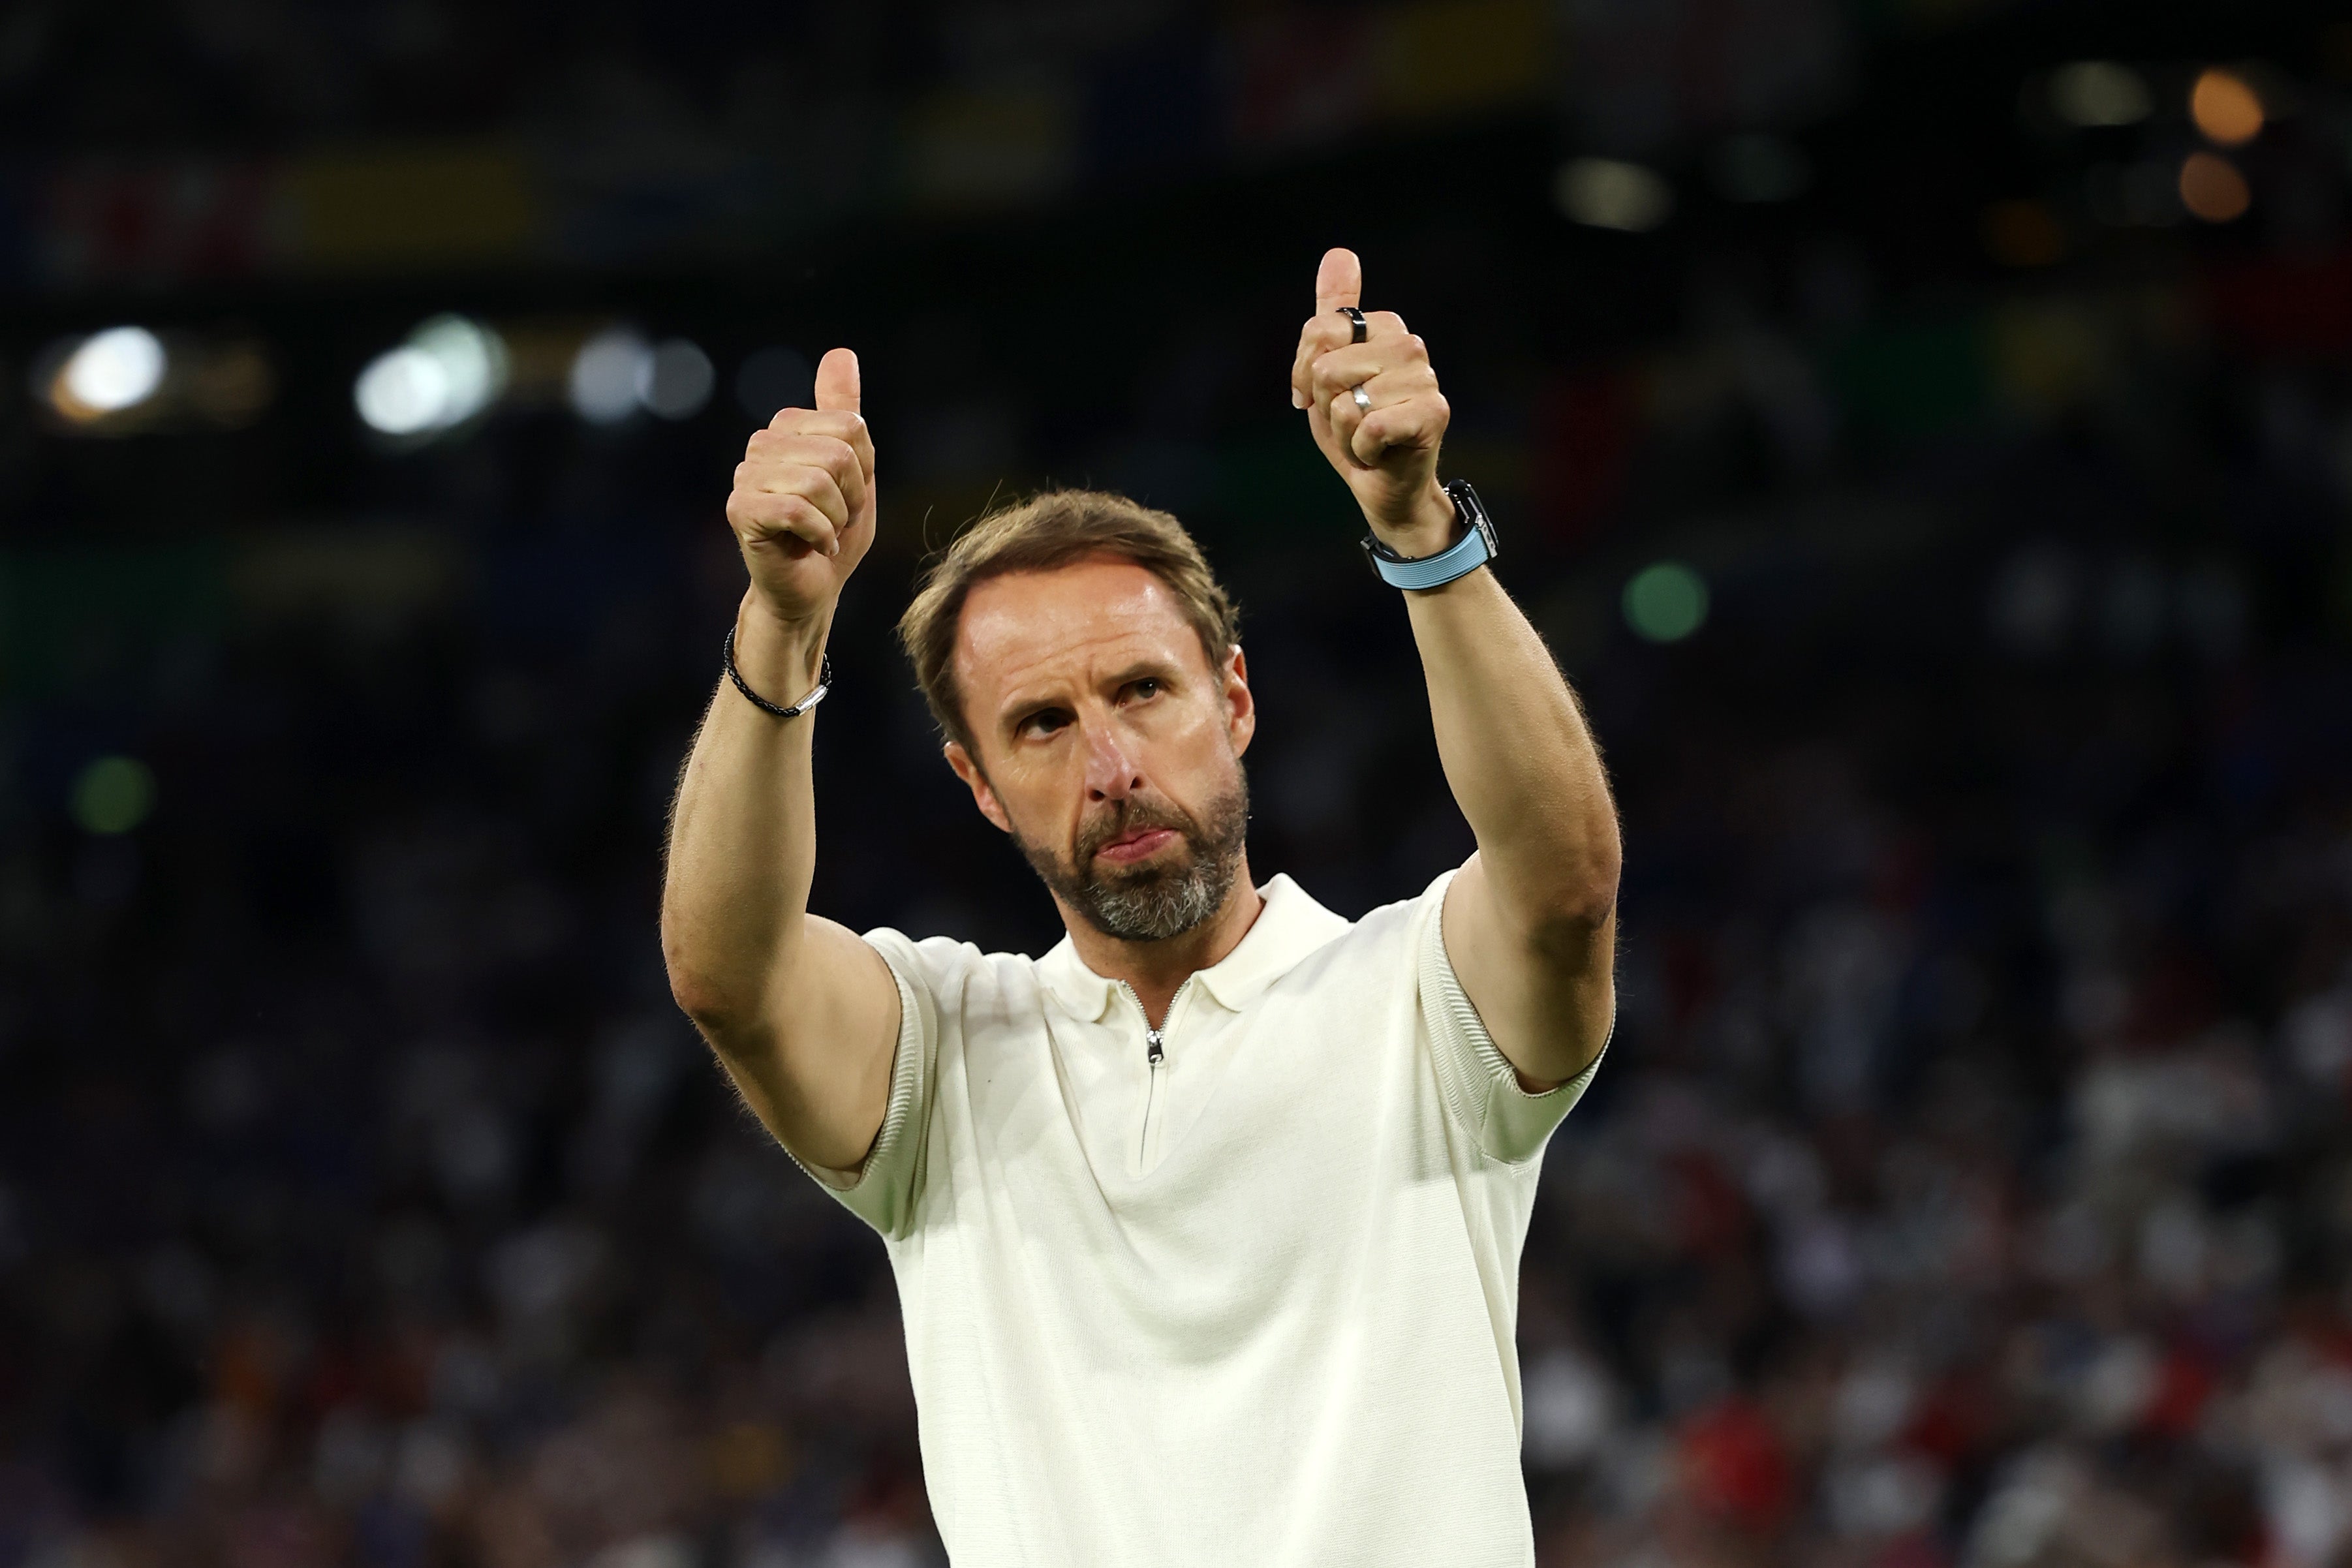 Gareth Southgaten acknowledges England fans after victory over Slovakia